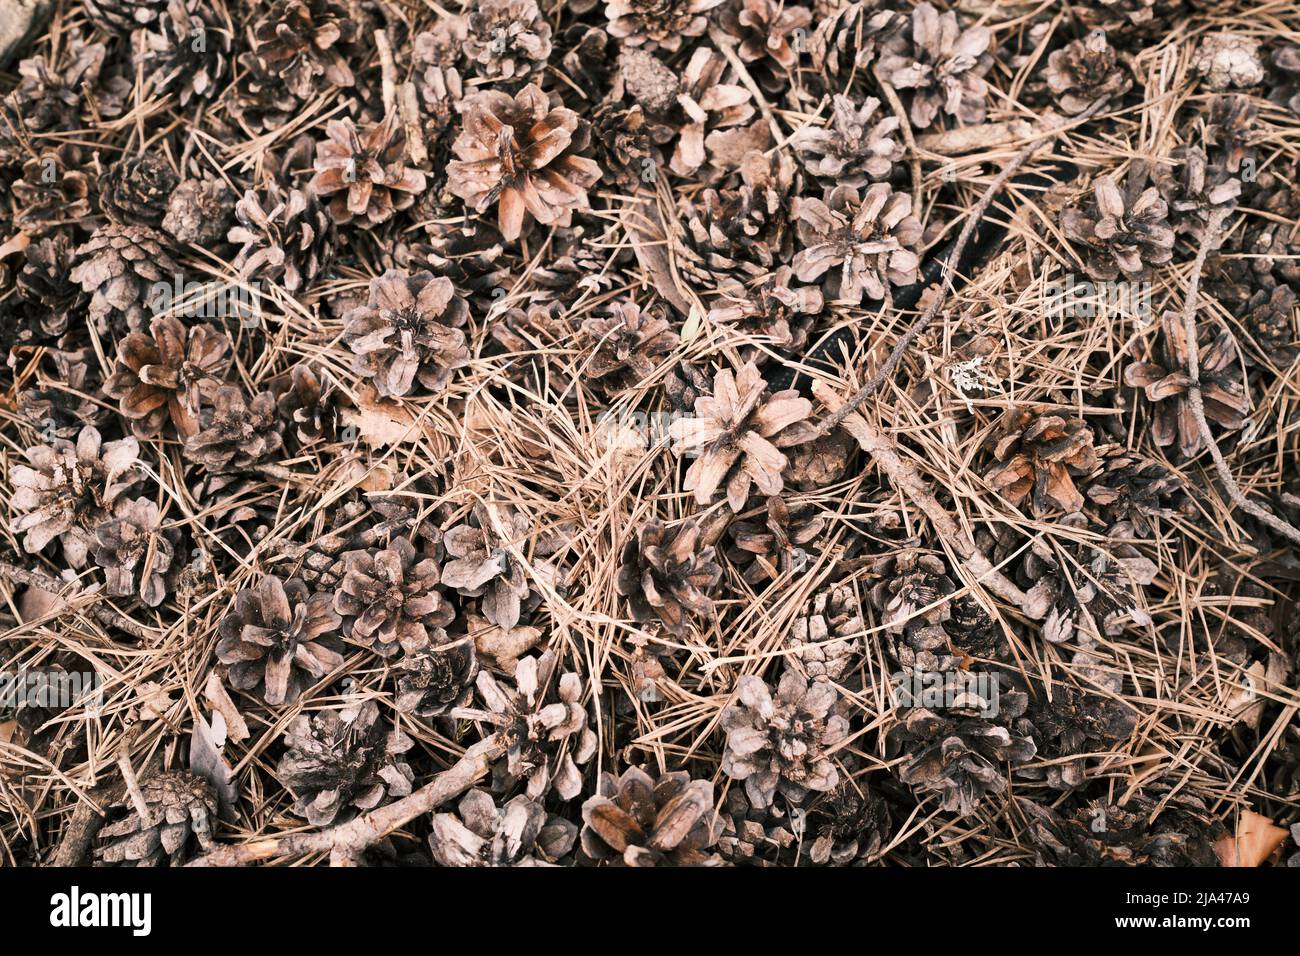 Pine or spruce cones lie on old dried up foliage and on pine needles. close-up.  Stock Photo